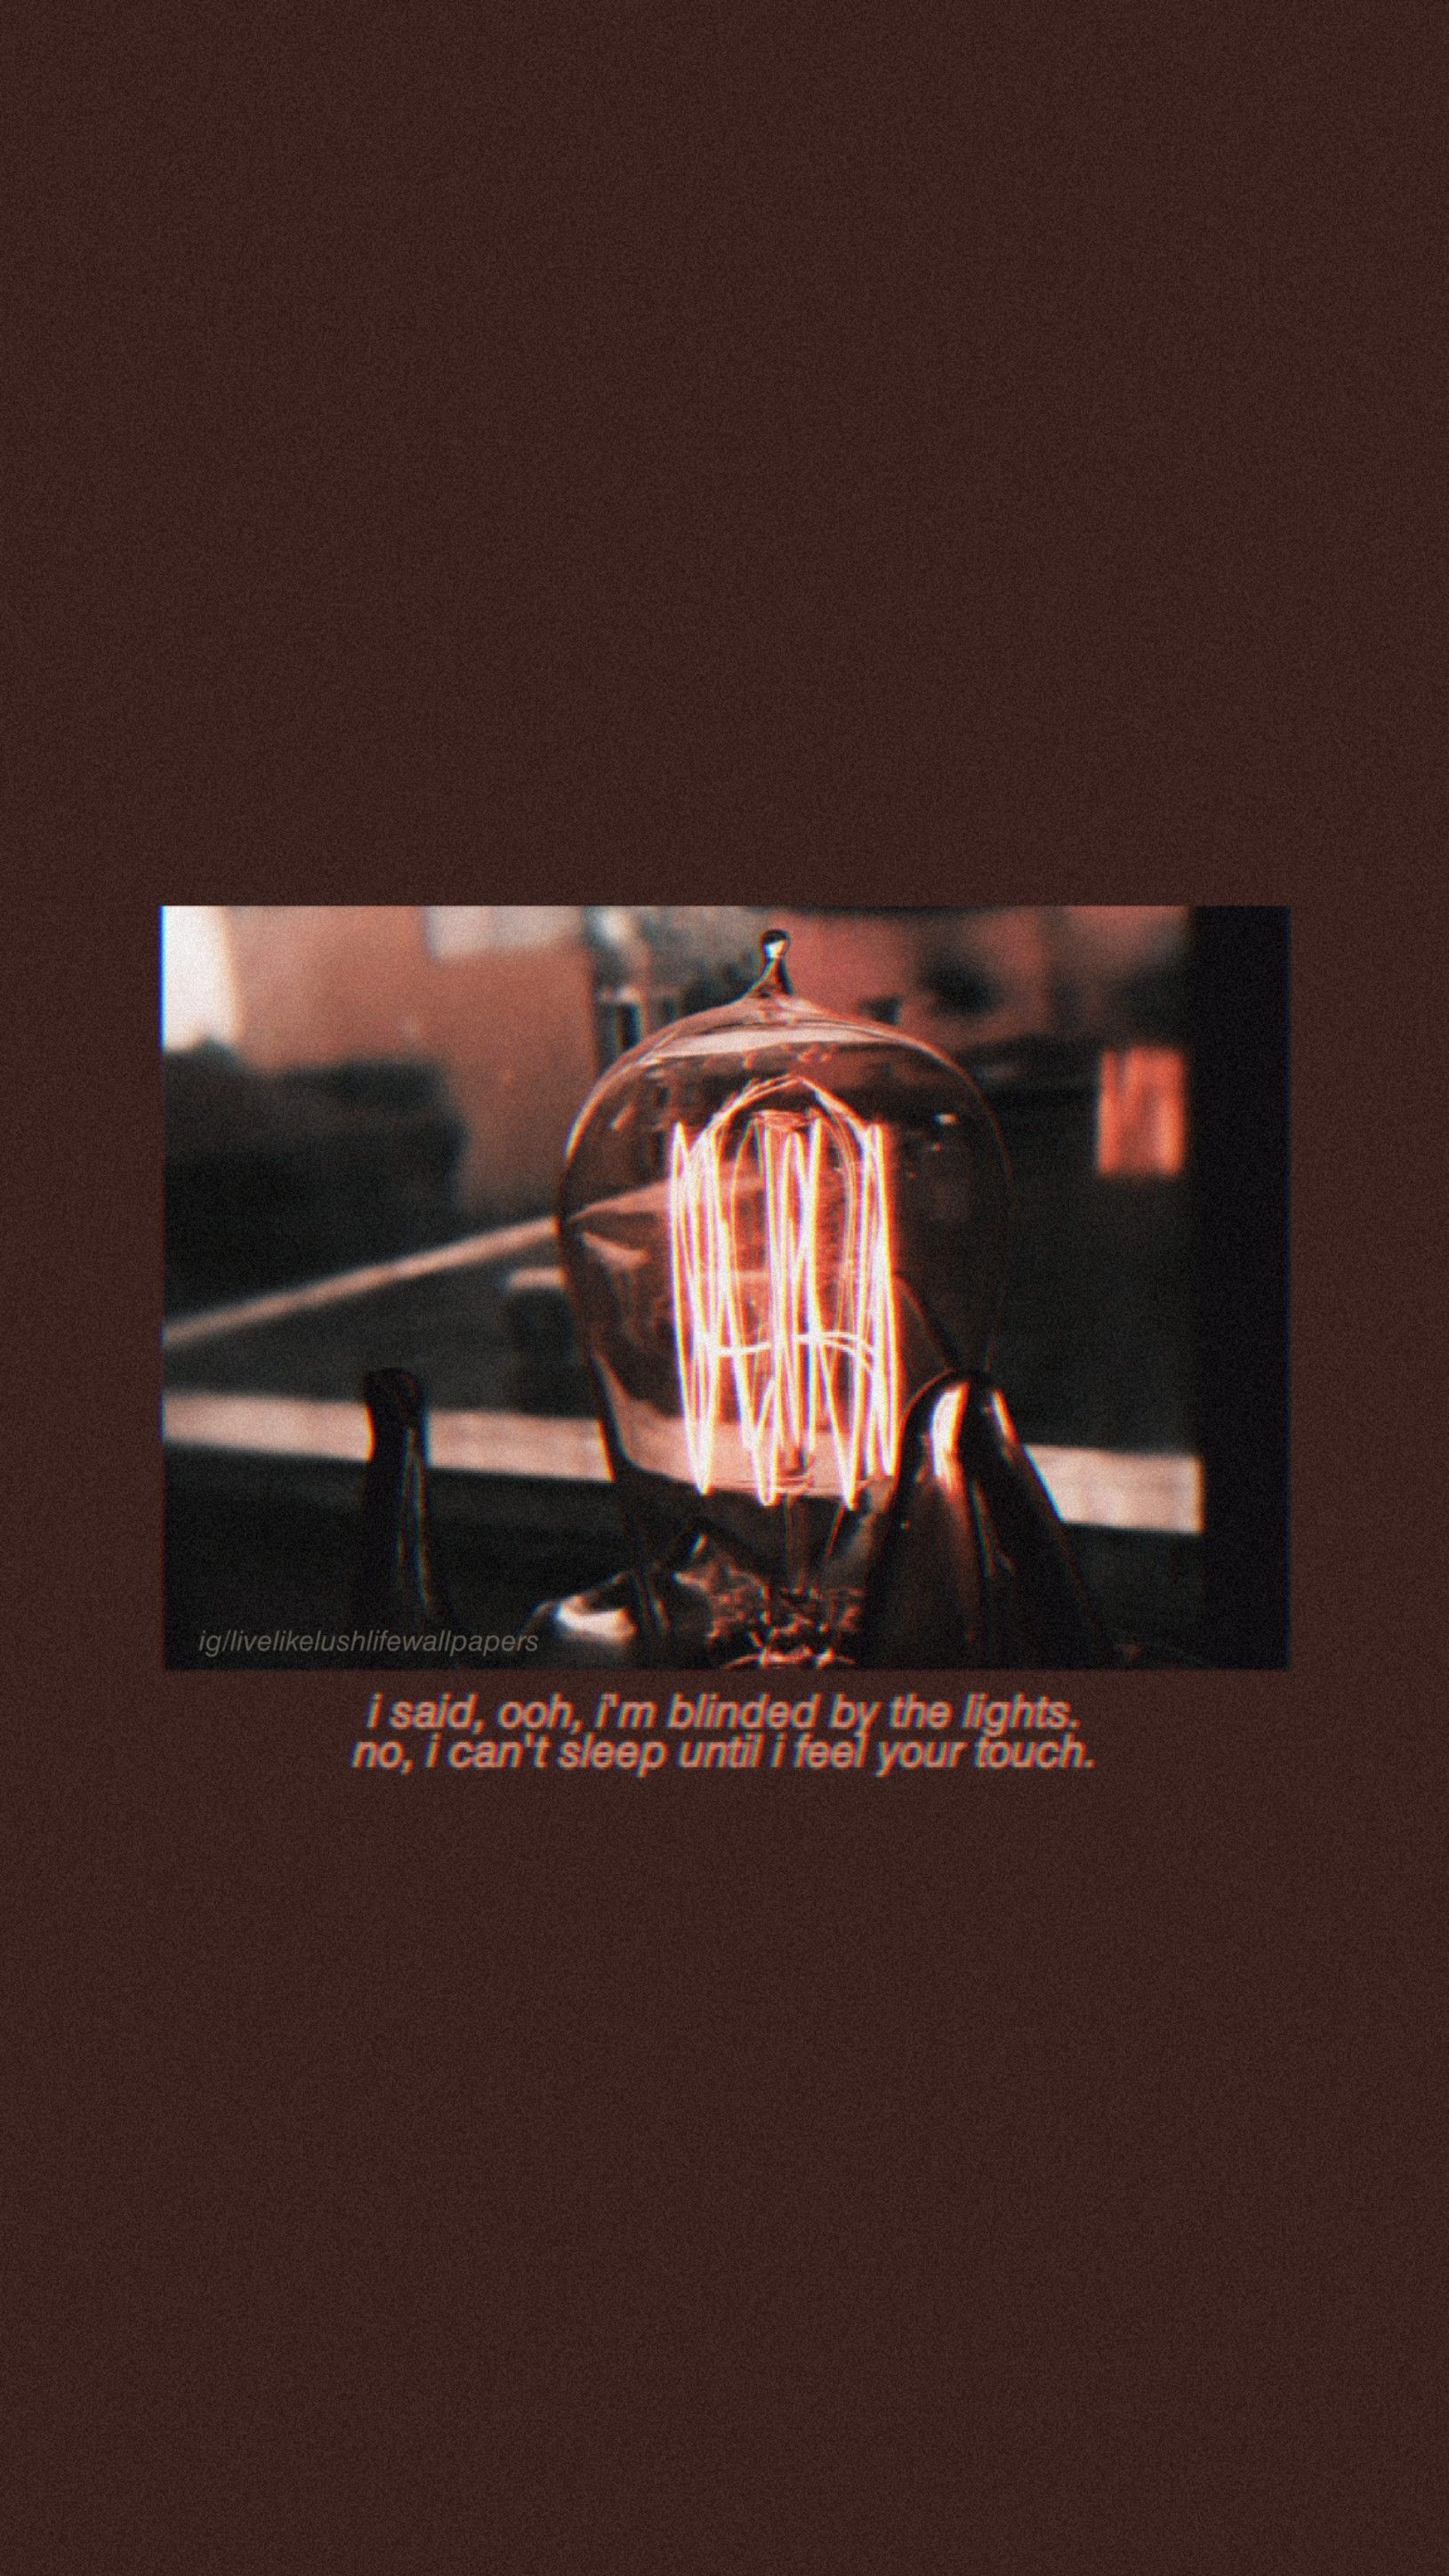 Aesthetic background of a lit light bulb with a quote. - The Weeknd